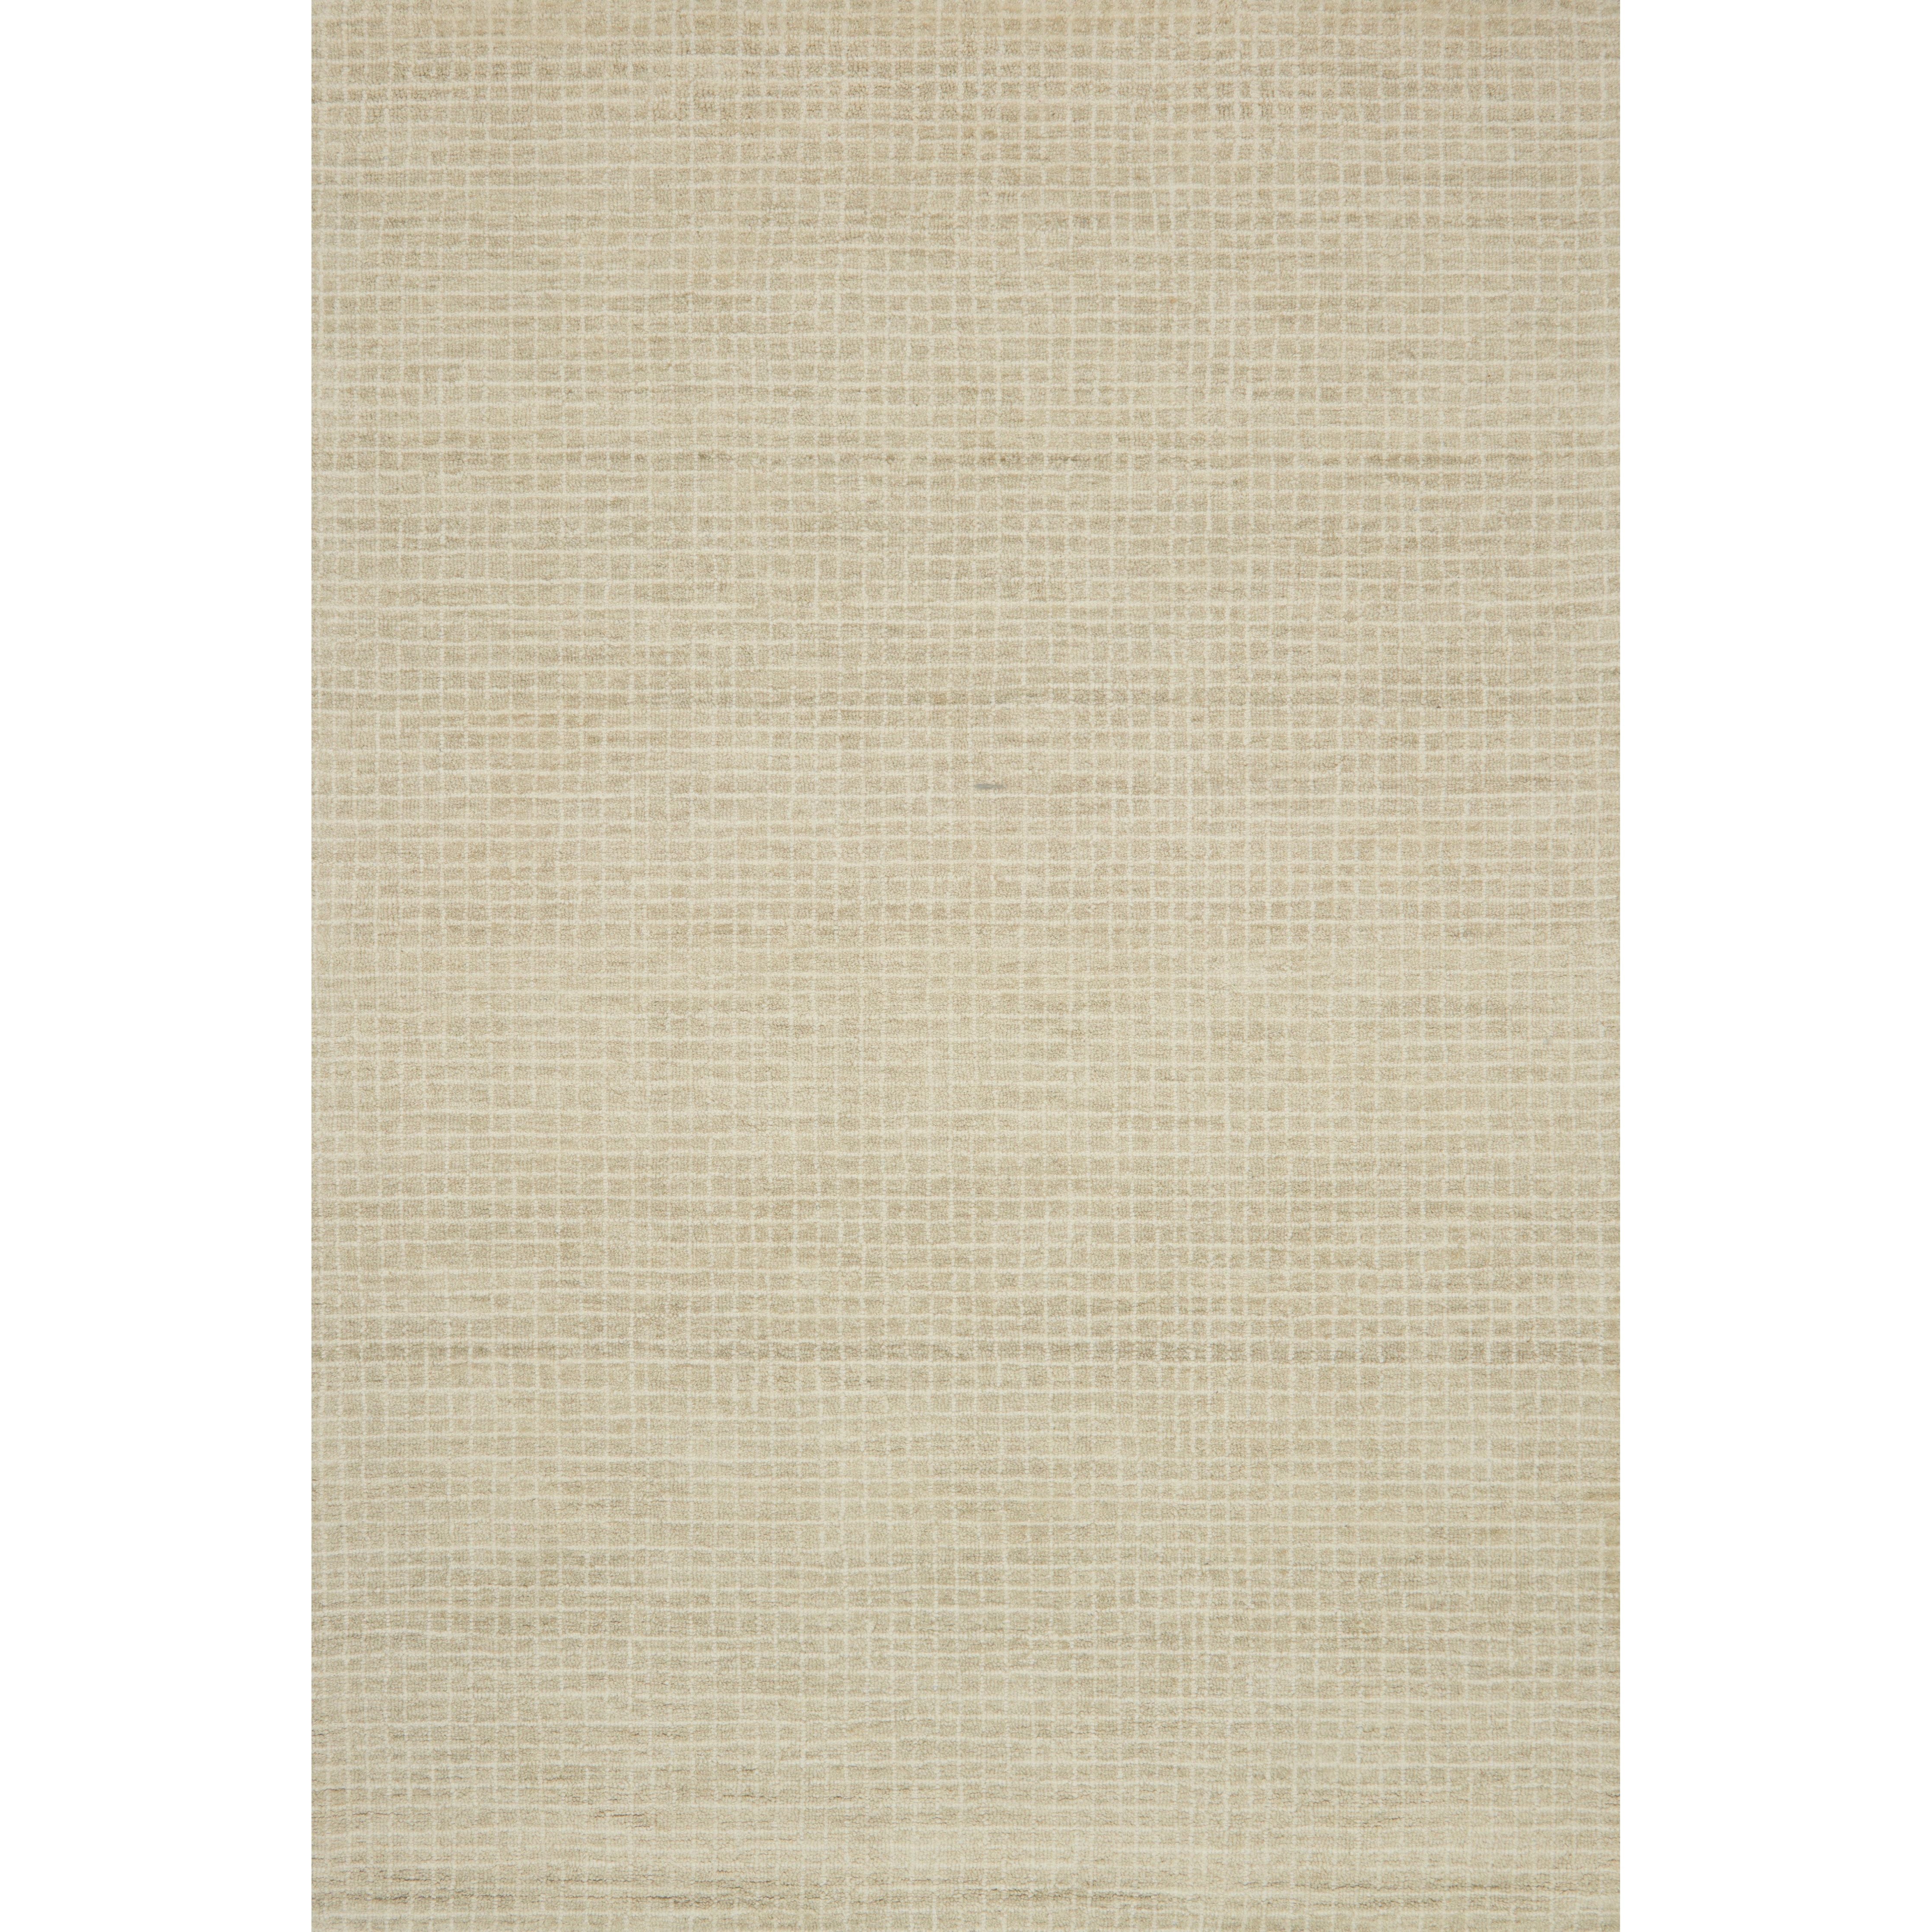 The Giana Antique Ivory Area Rug, or GH-01, by Loloi combines a relaxed grid with soft variations of cream and ivory for an effortless and sophisticated look. Each rug is hooked of 100% wool by artisans for a beautiful textural layer to your home. The soft textures of this rug bring warmth and coziness to any room.